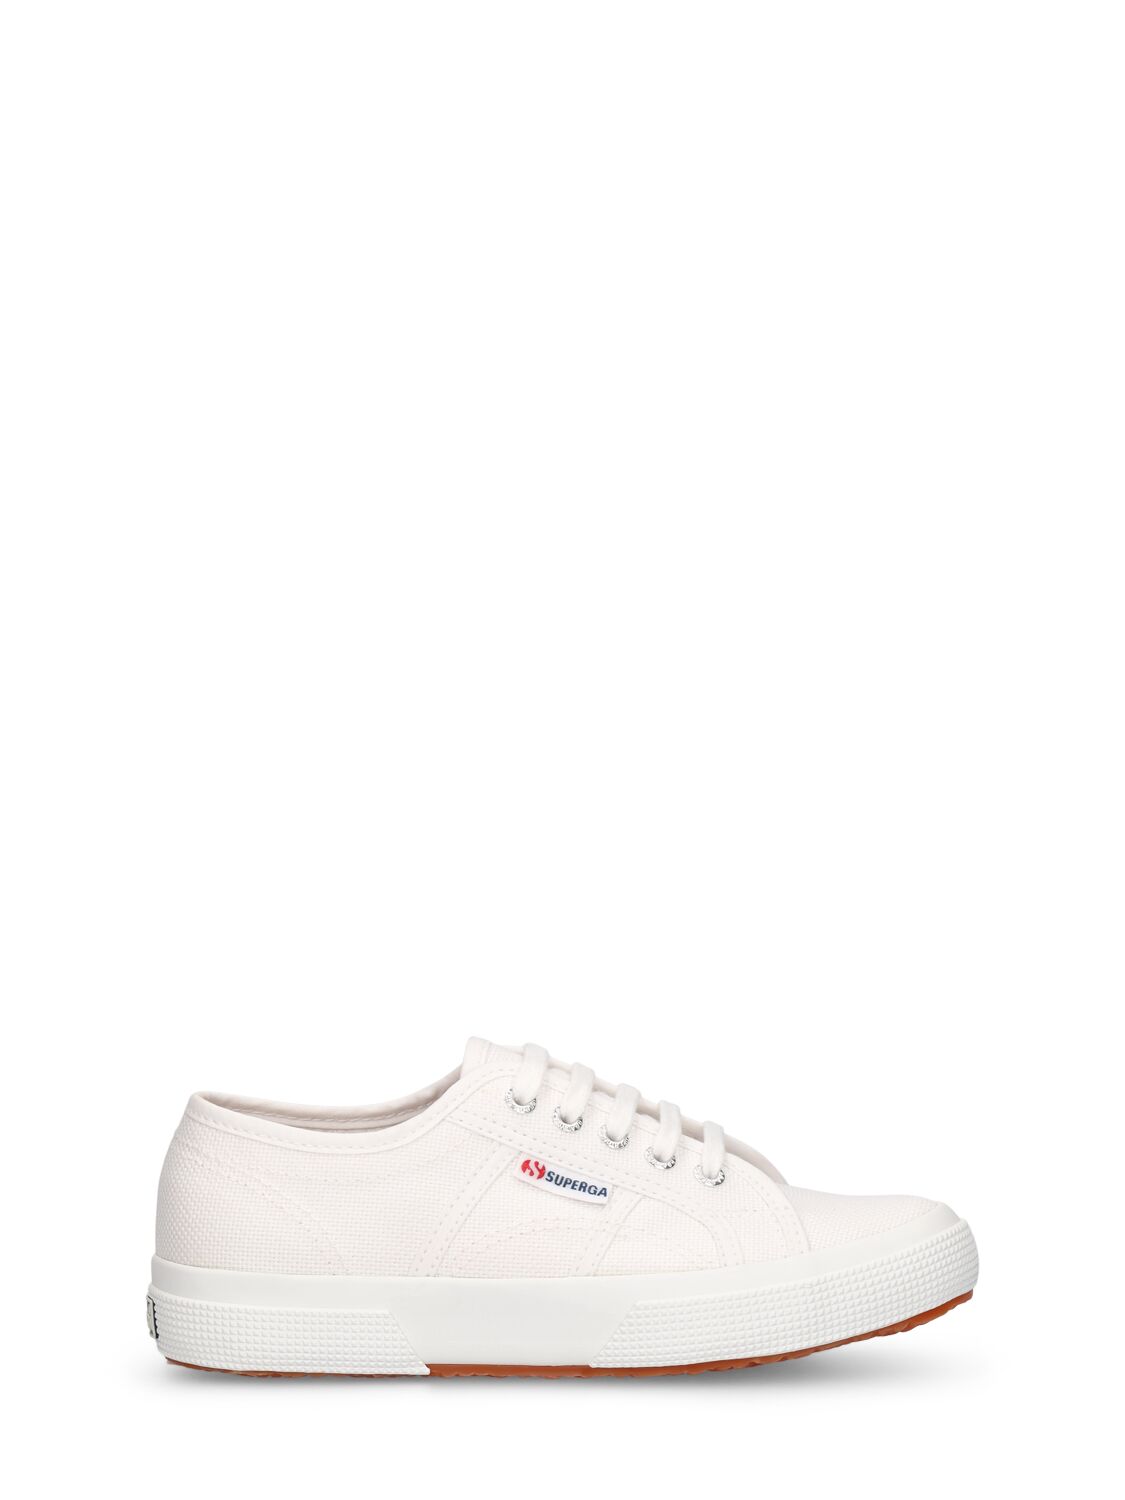 Superga Kids' 2750 Lace-up Sneakers In 화이트